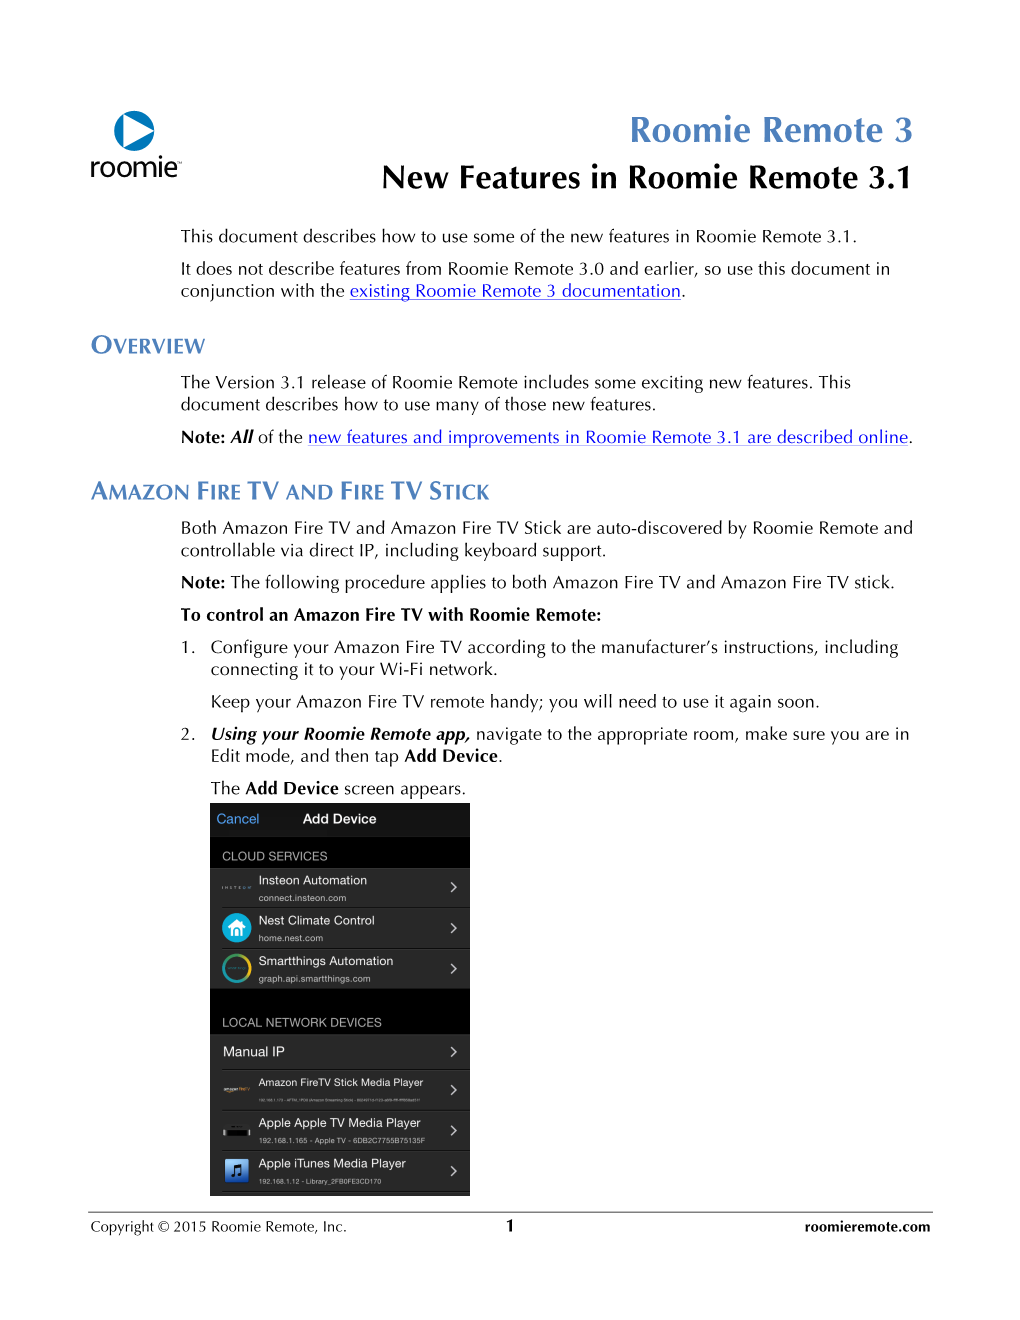 Roomie Remote 3.1 New Features